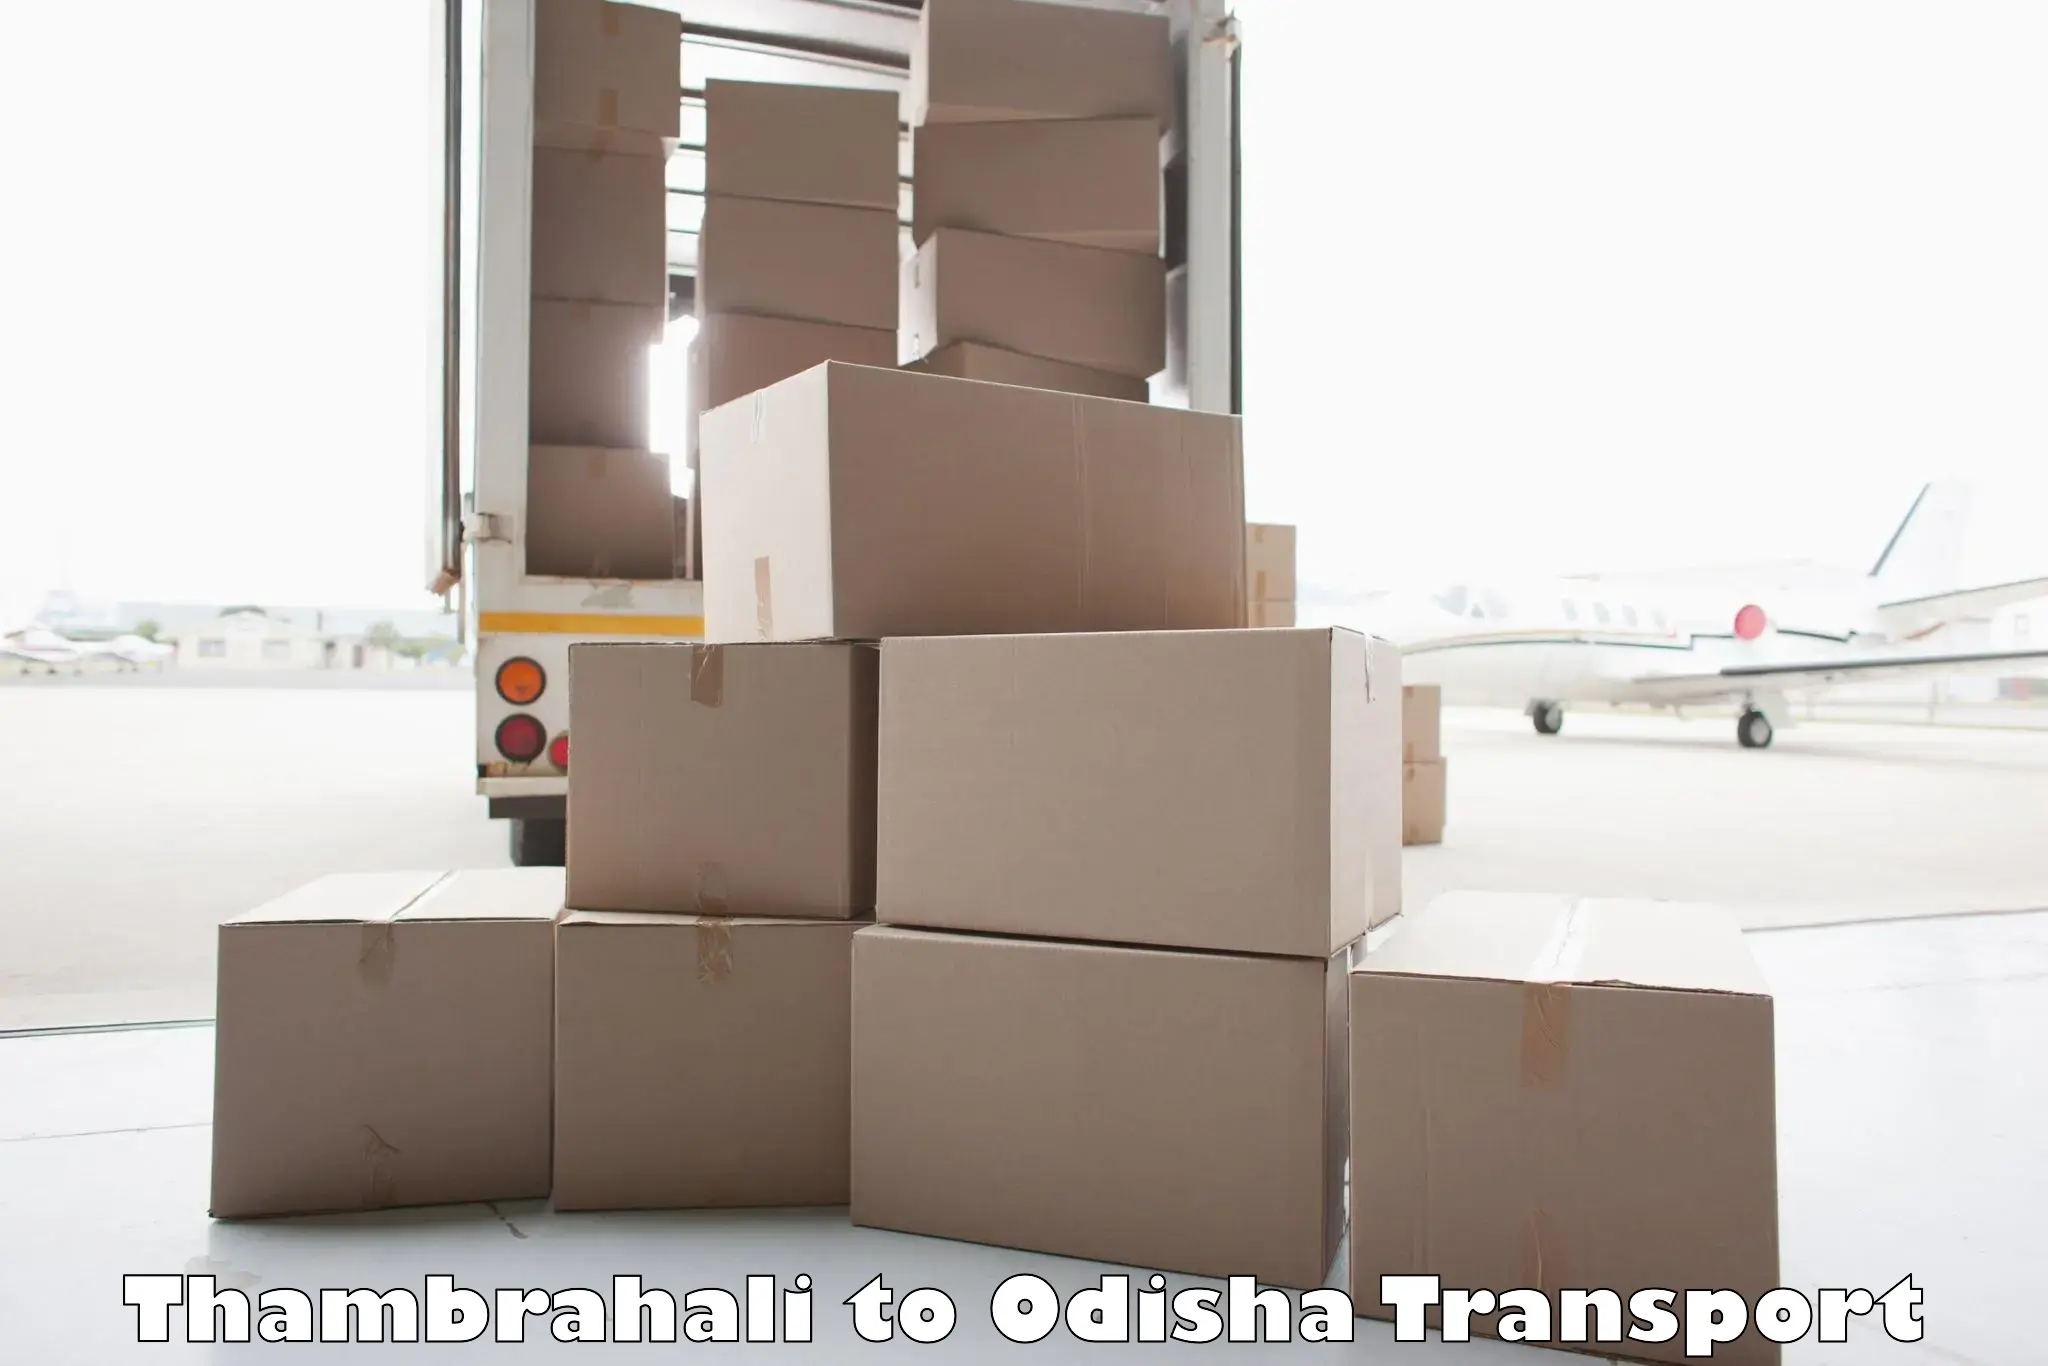 Express transport services Thambrahali to Galleri